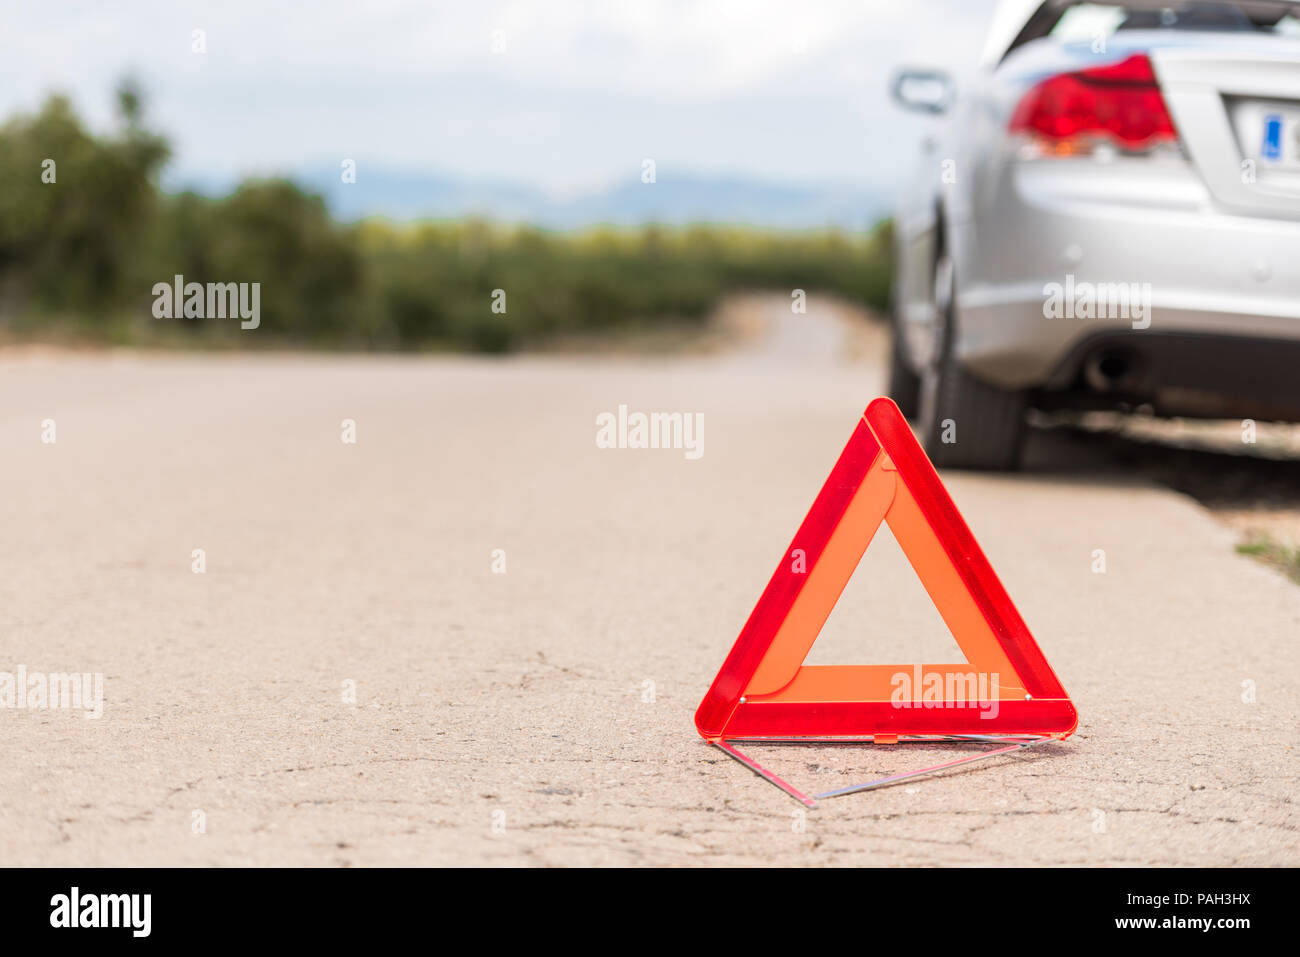 The car broke down on the road. Emergency sign close-up on the road, Tarragona, Catalunya, Spain Stock Photo